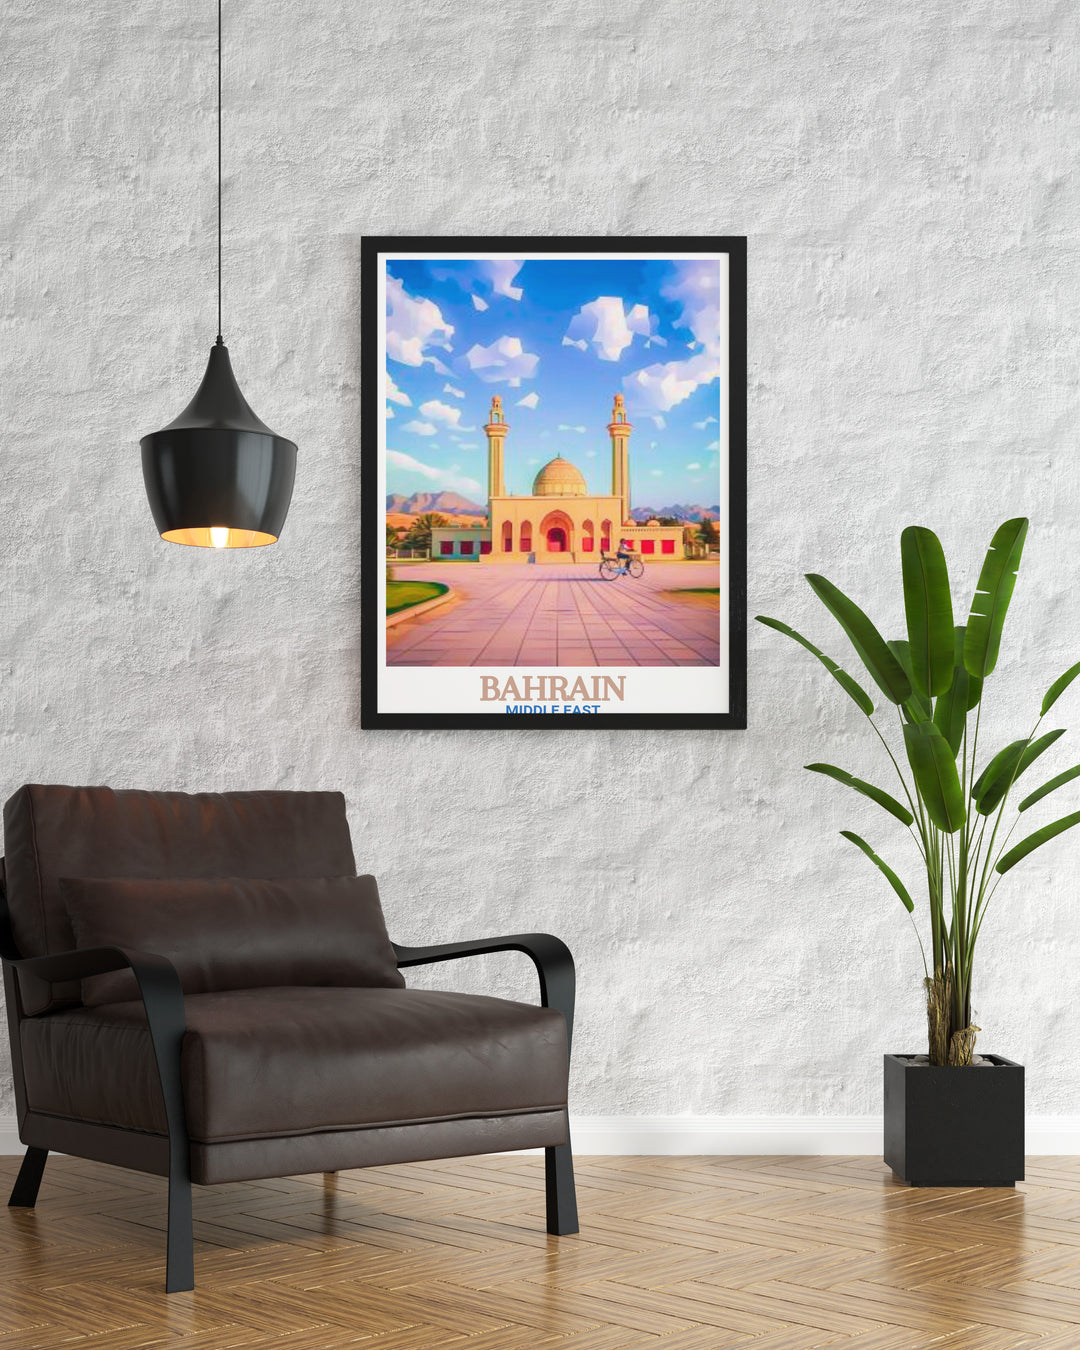 Bahrain Travel Art featuring the iconic Al Fateh Grand Mosque a perfect addition to any home decor celebrating the intricate architecture and vibrant culture of Bahrain.